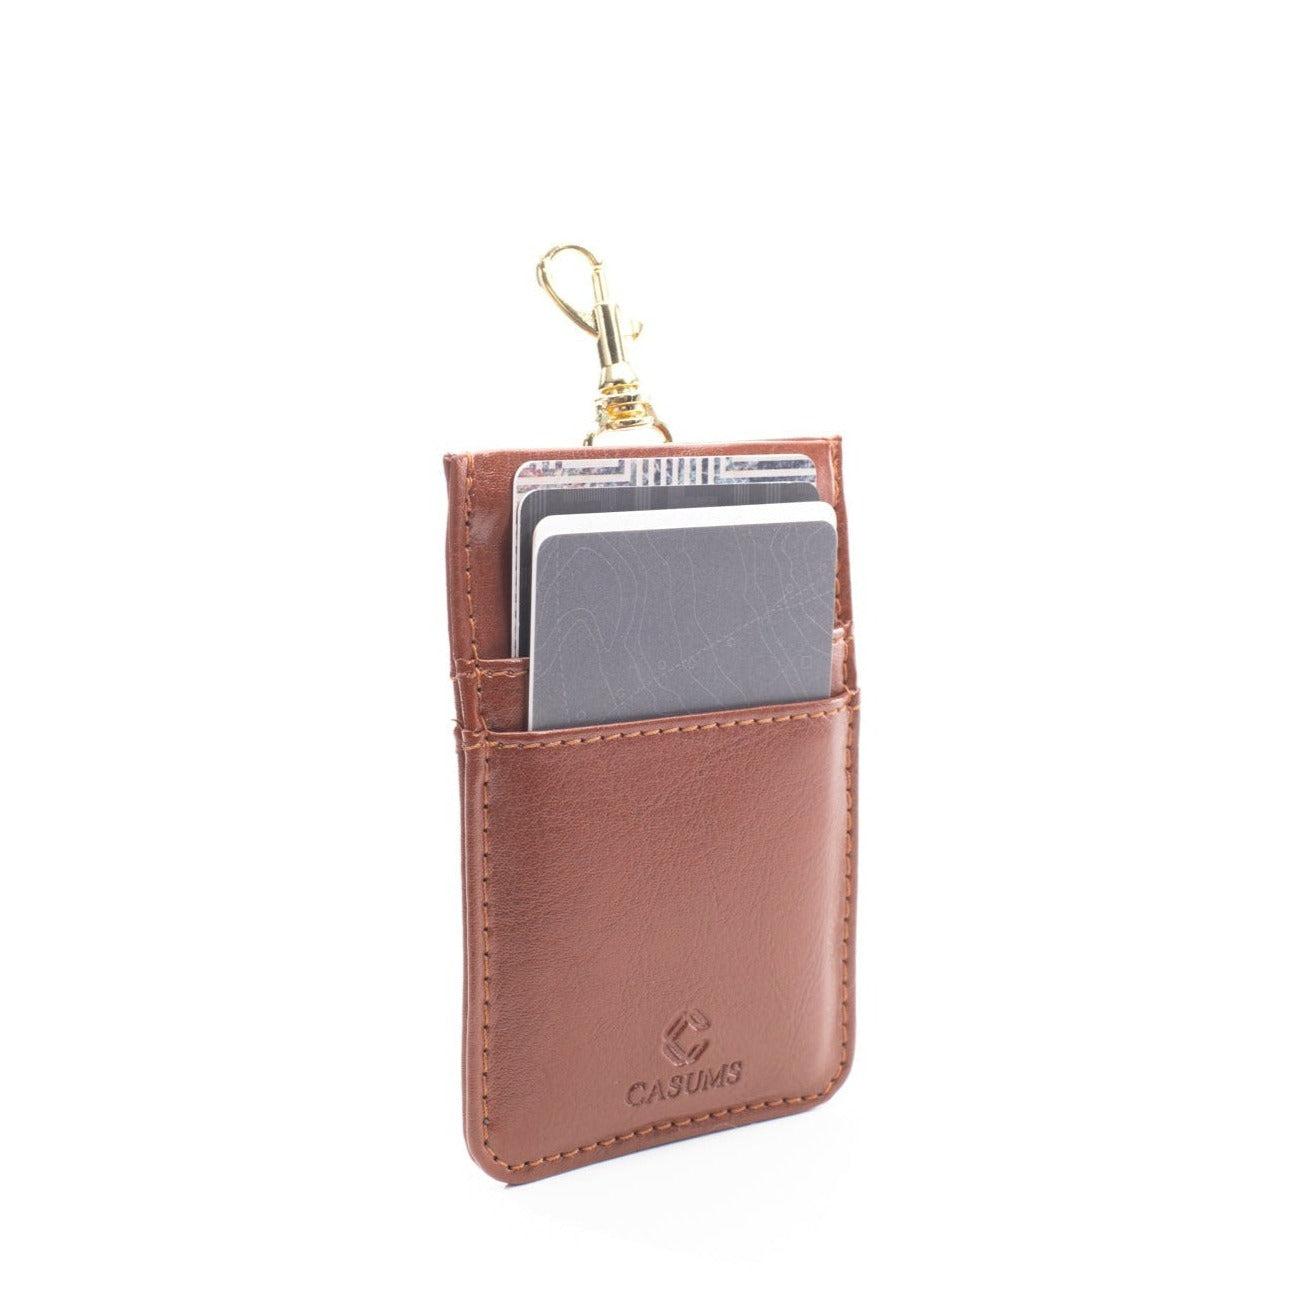 Card Case Wallet - Tan - Gold Toned Hardware